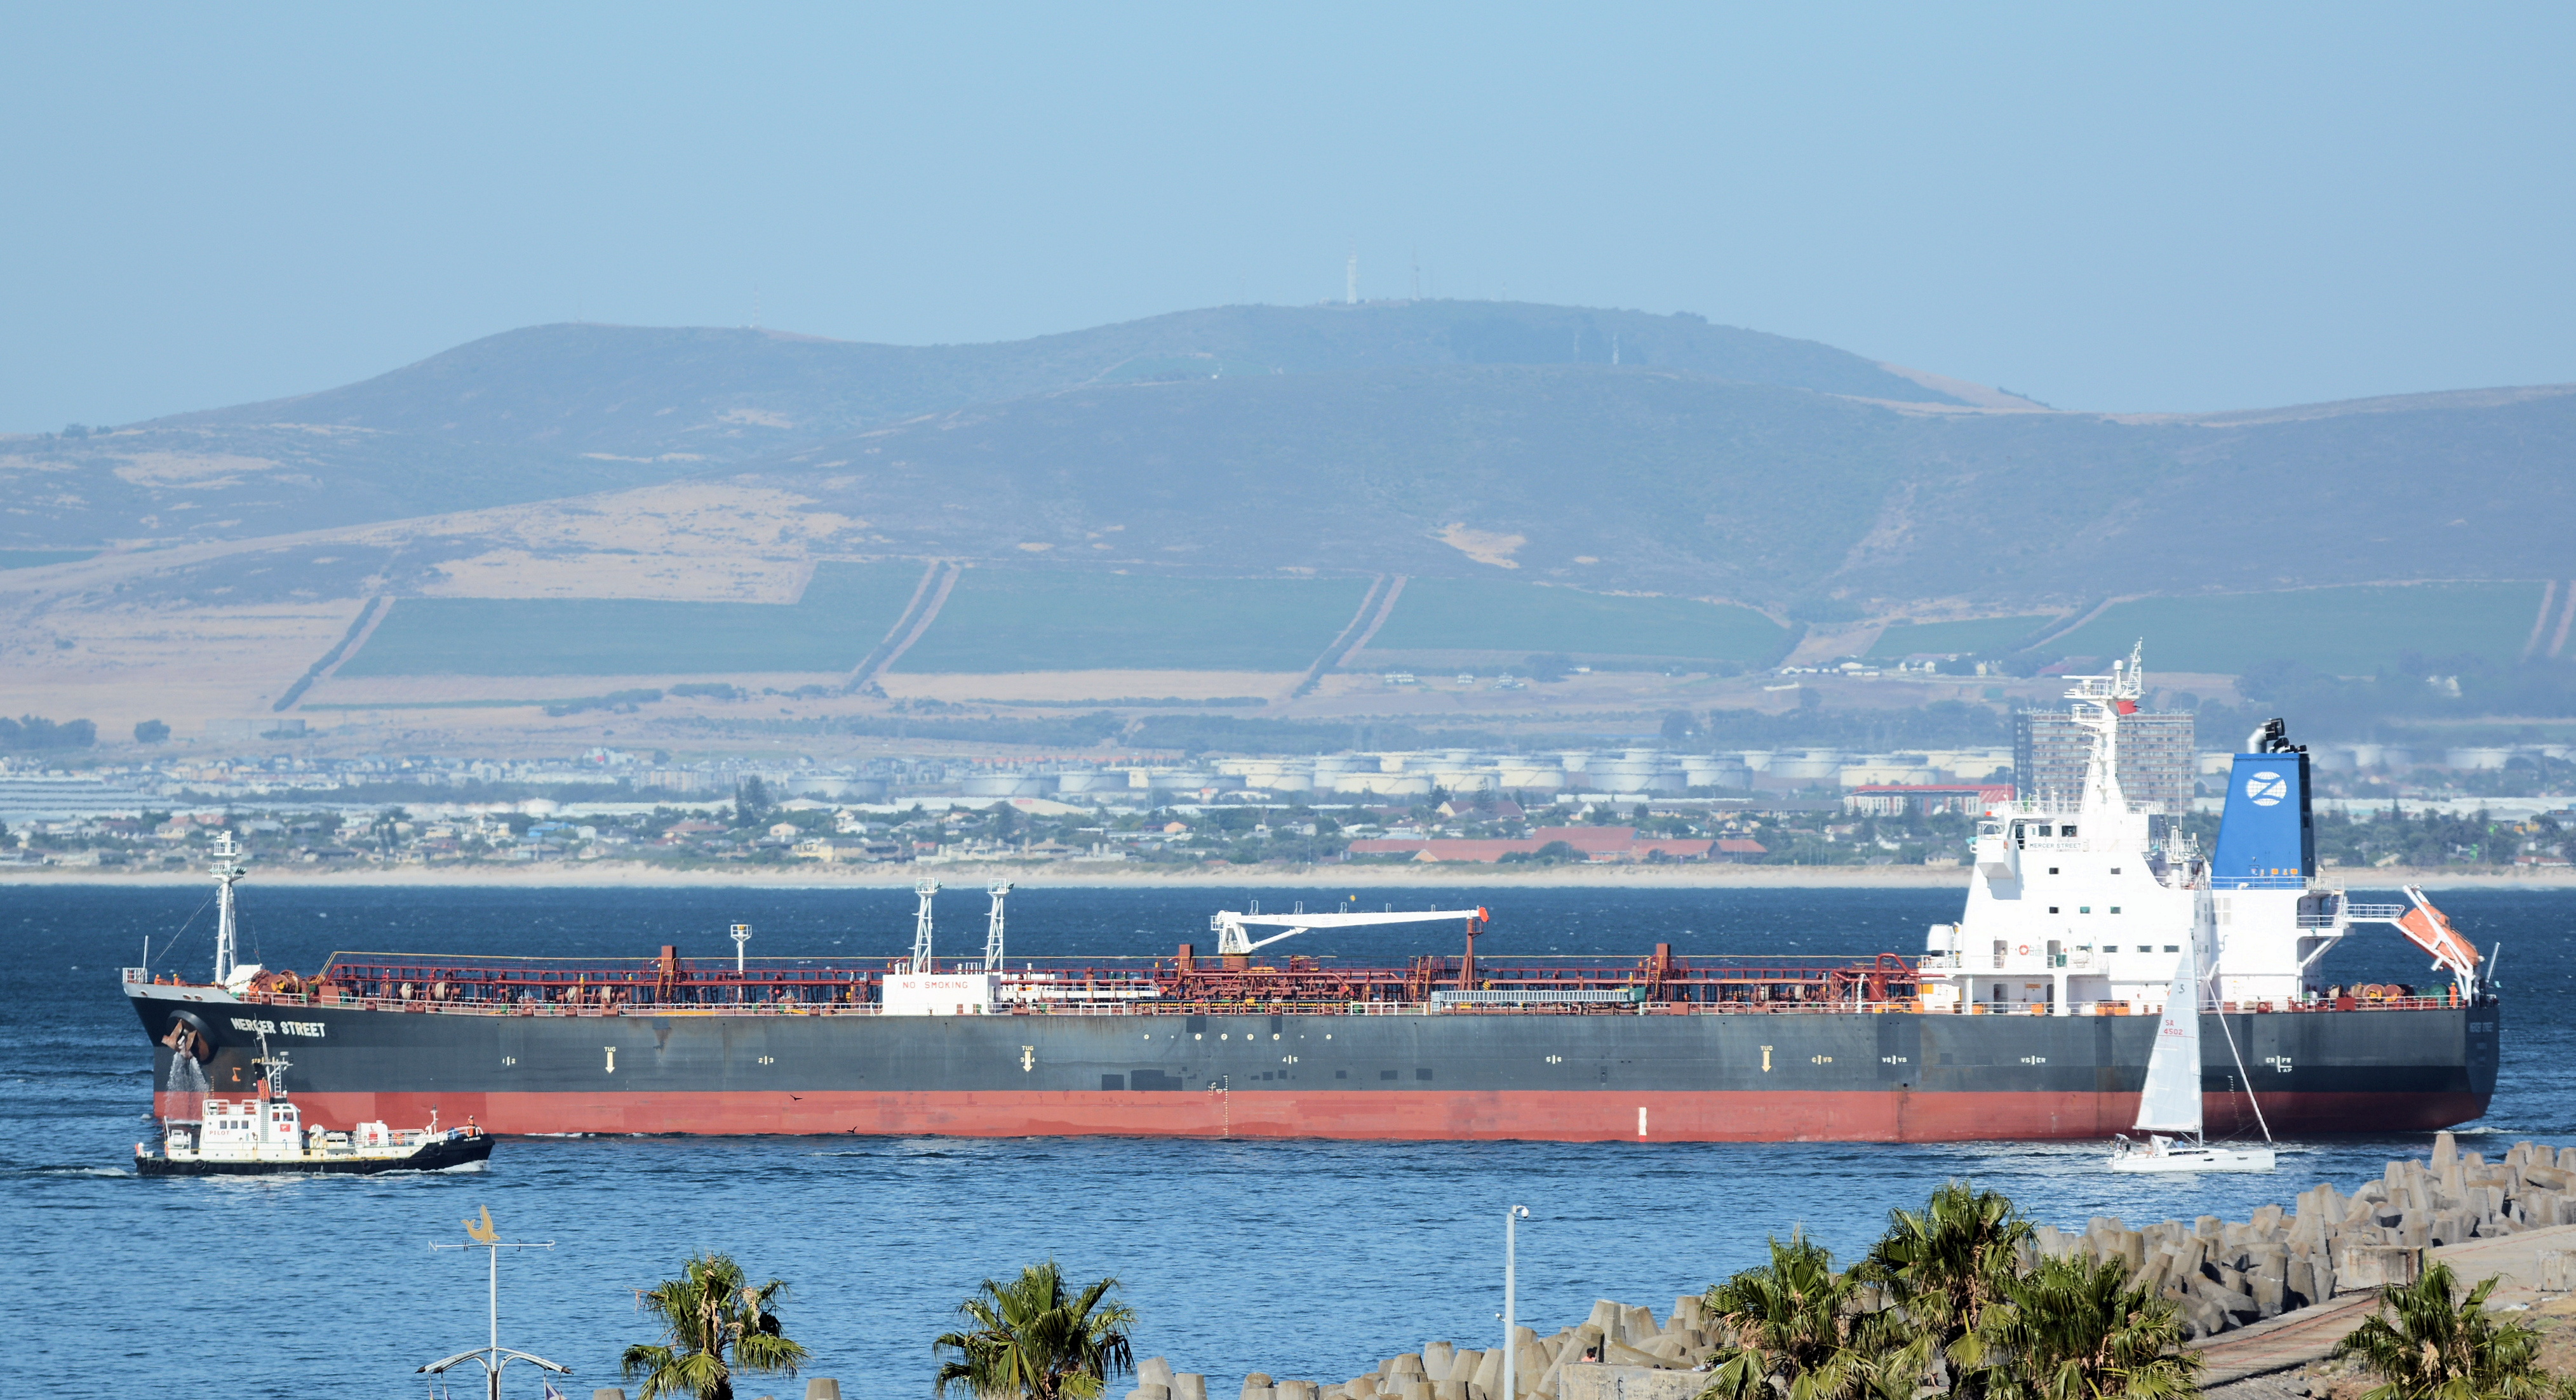 The Mercer Street, a Japanese-owned Liberian-flagged tanker managed by Israeli-owned Zodiac Maritime that was attacked off Oman coast as seen in Cape Town